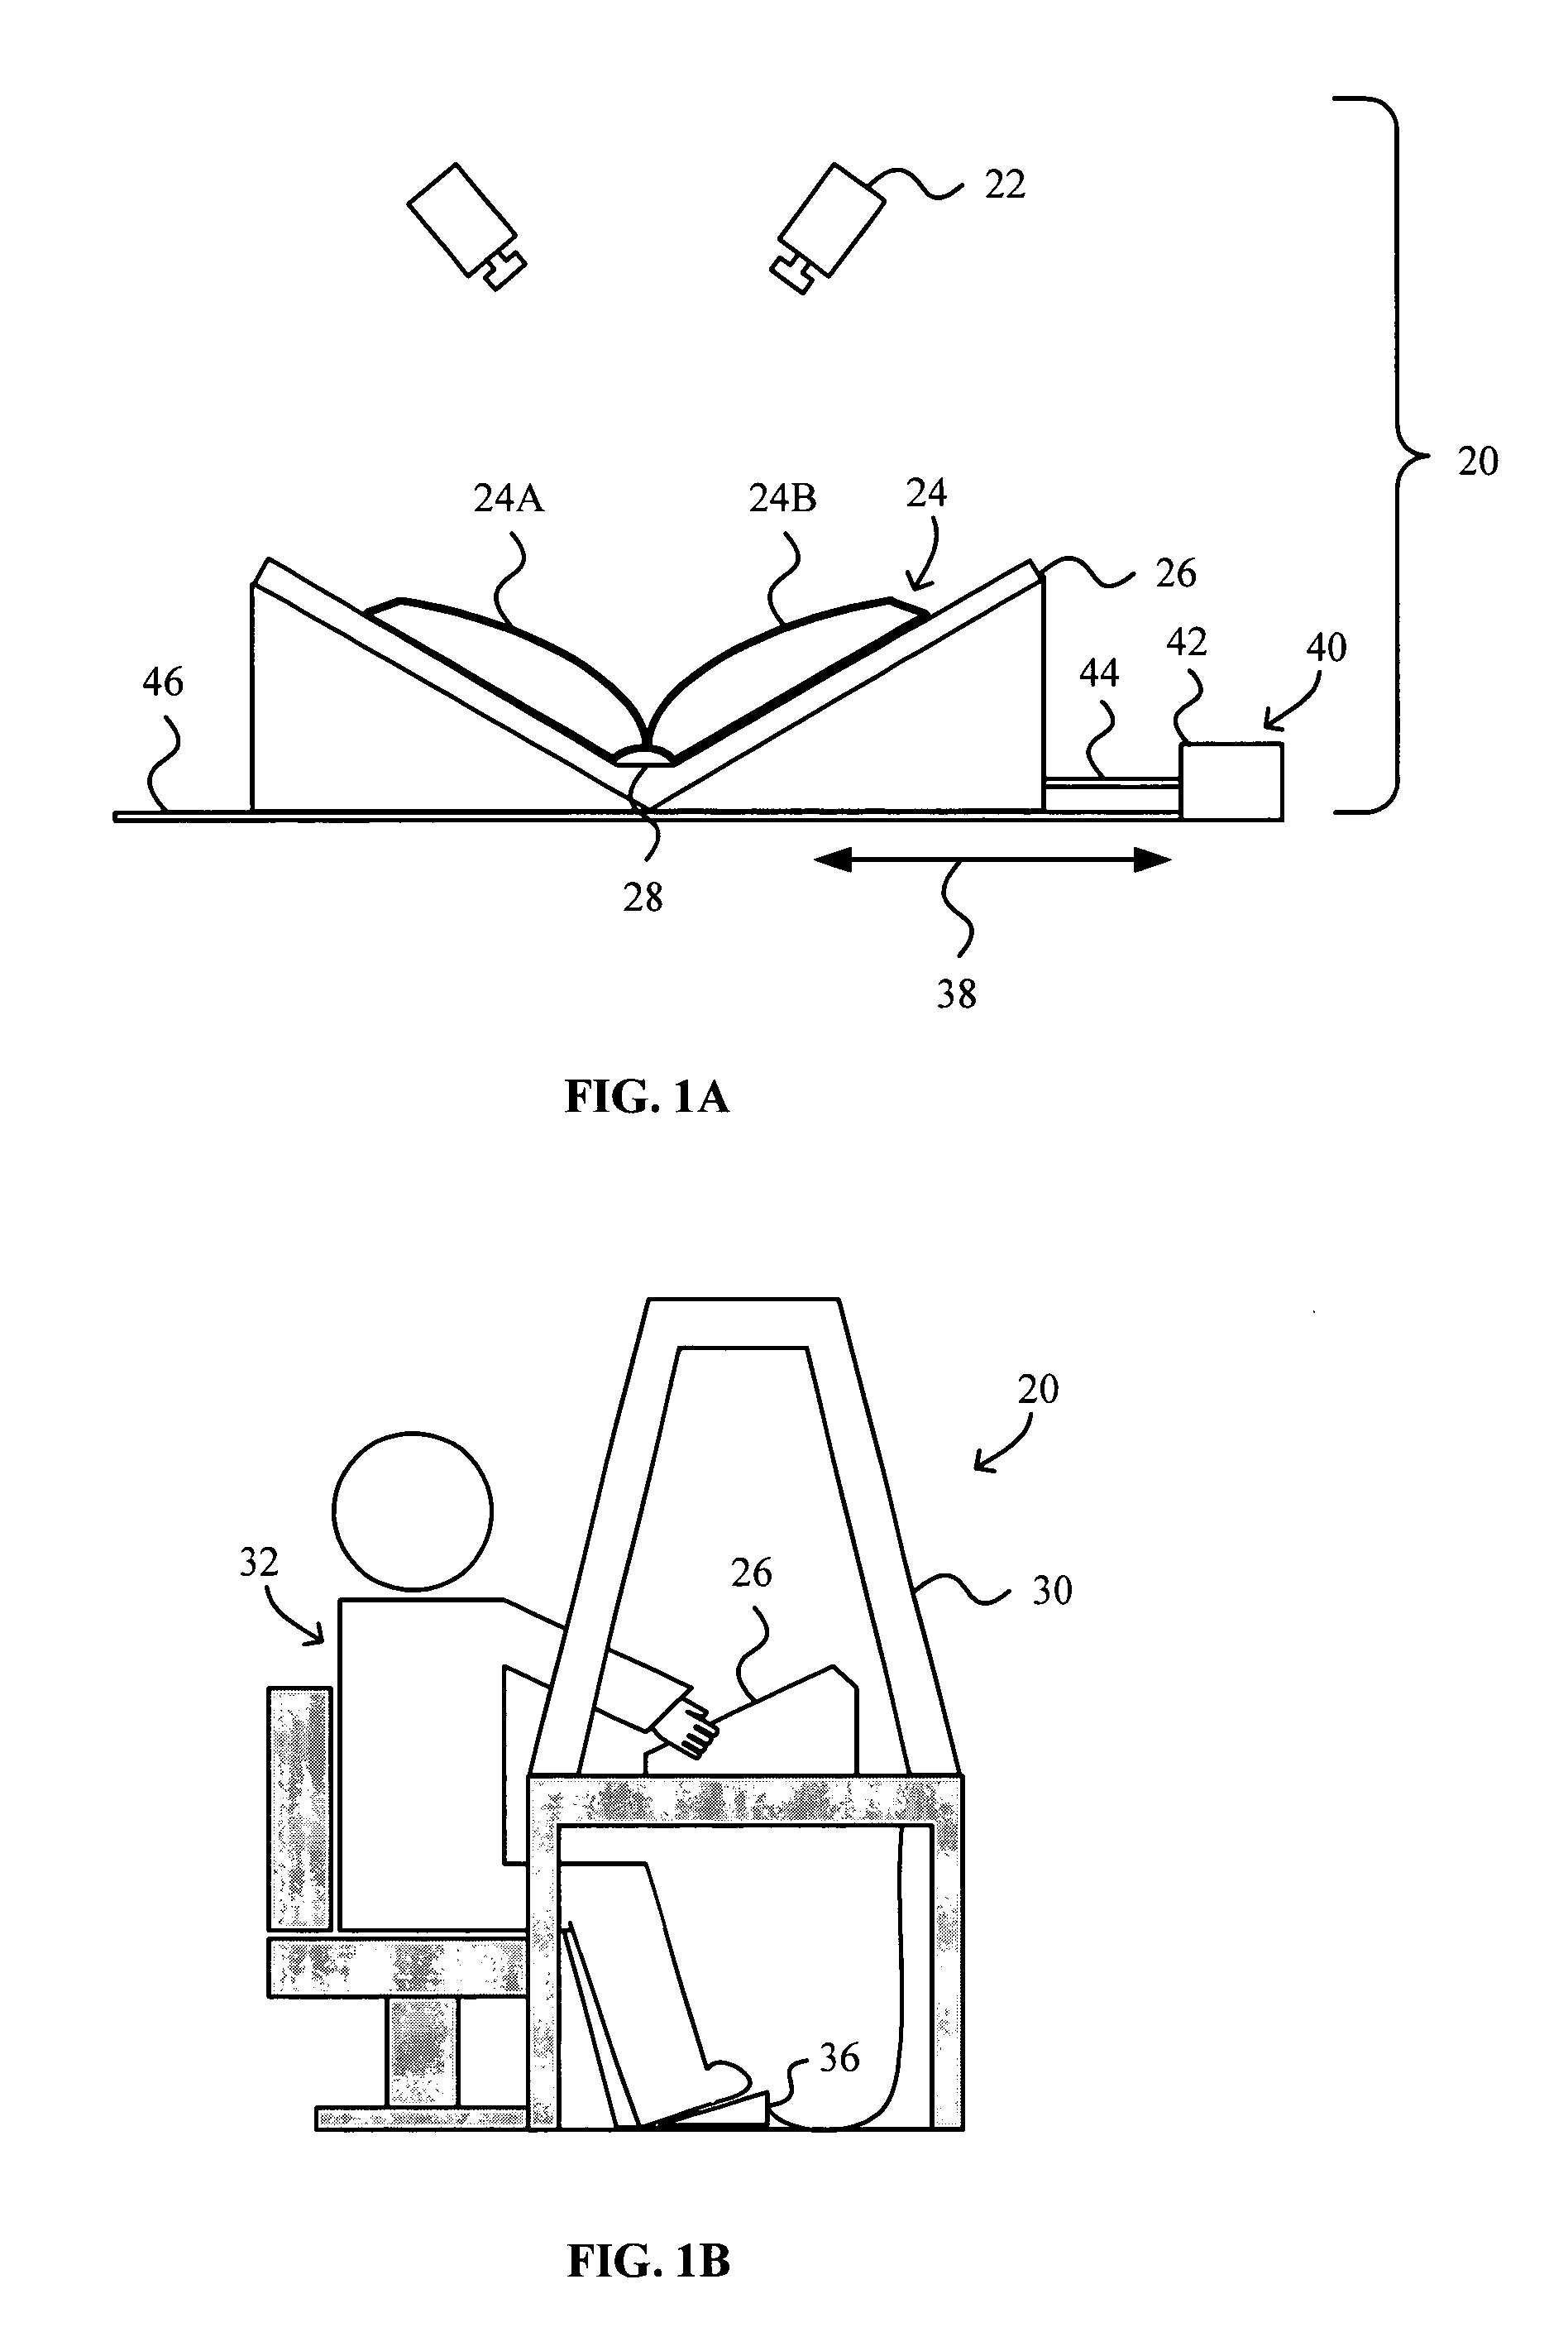 Movable document cradle for facilitating imaging of bound documents